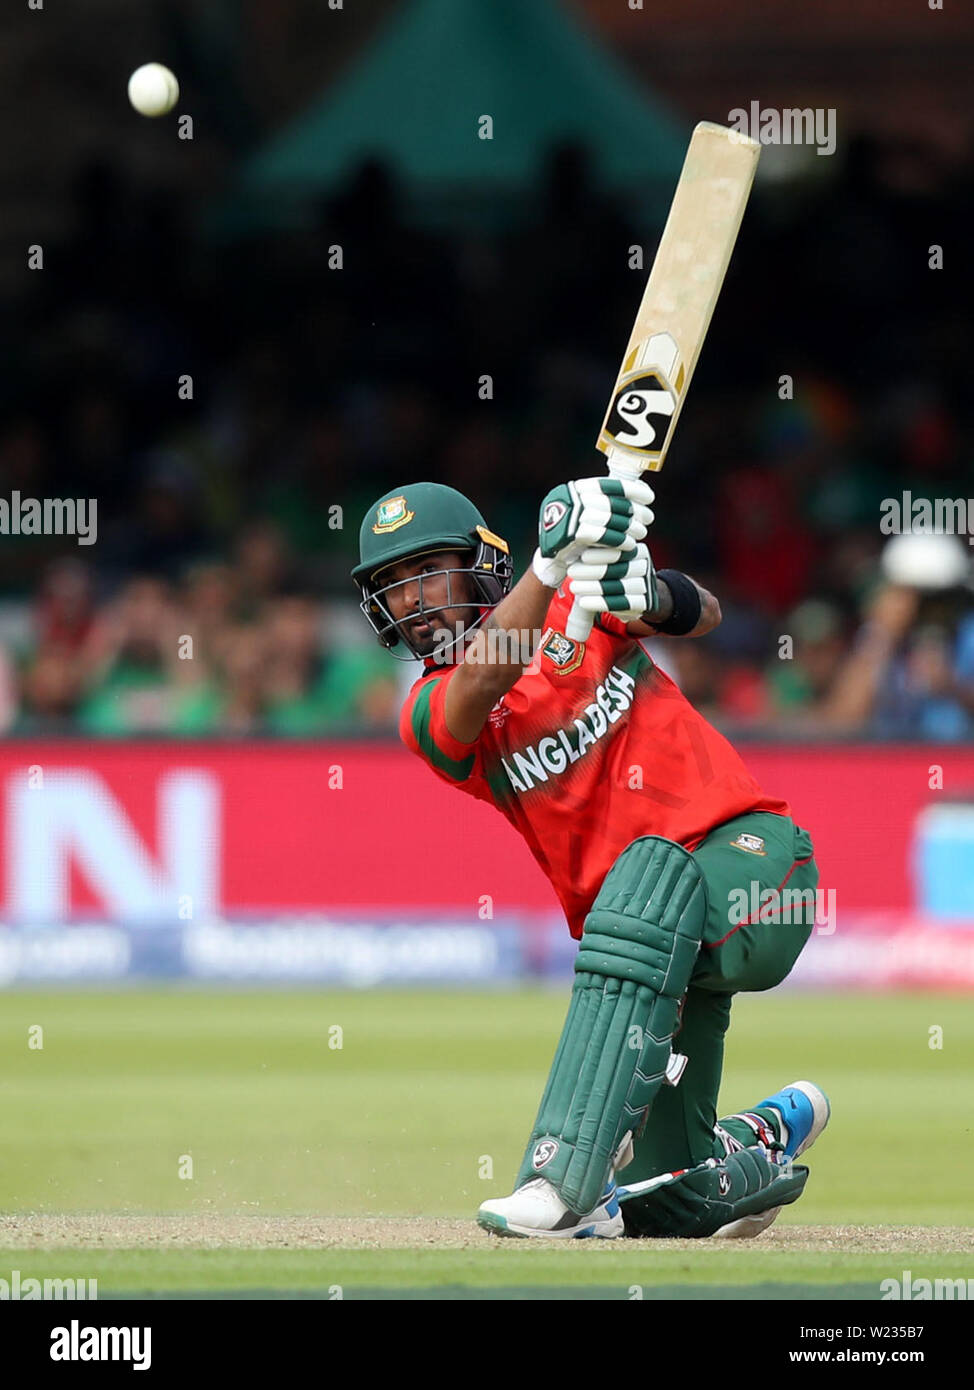 Bangladesh's Liton Das bats during the ICC Cricket World Cup group stage match at Lord's, London. Stock Photo